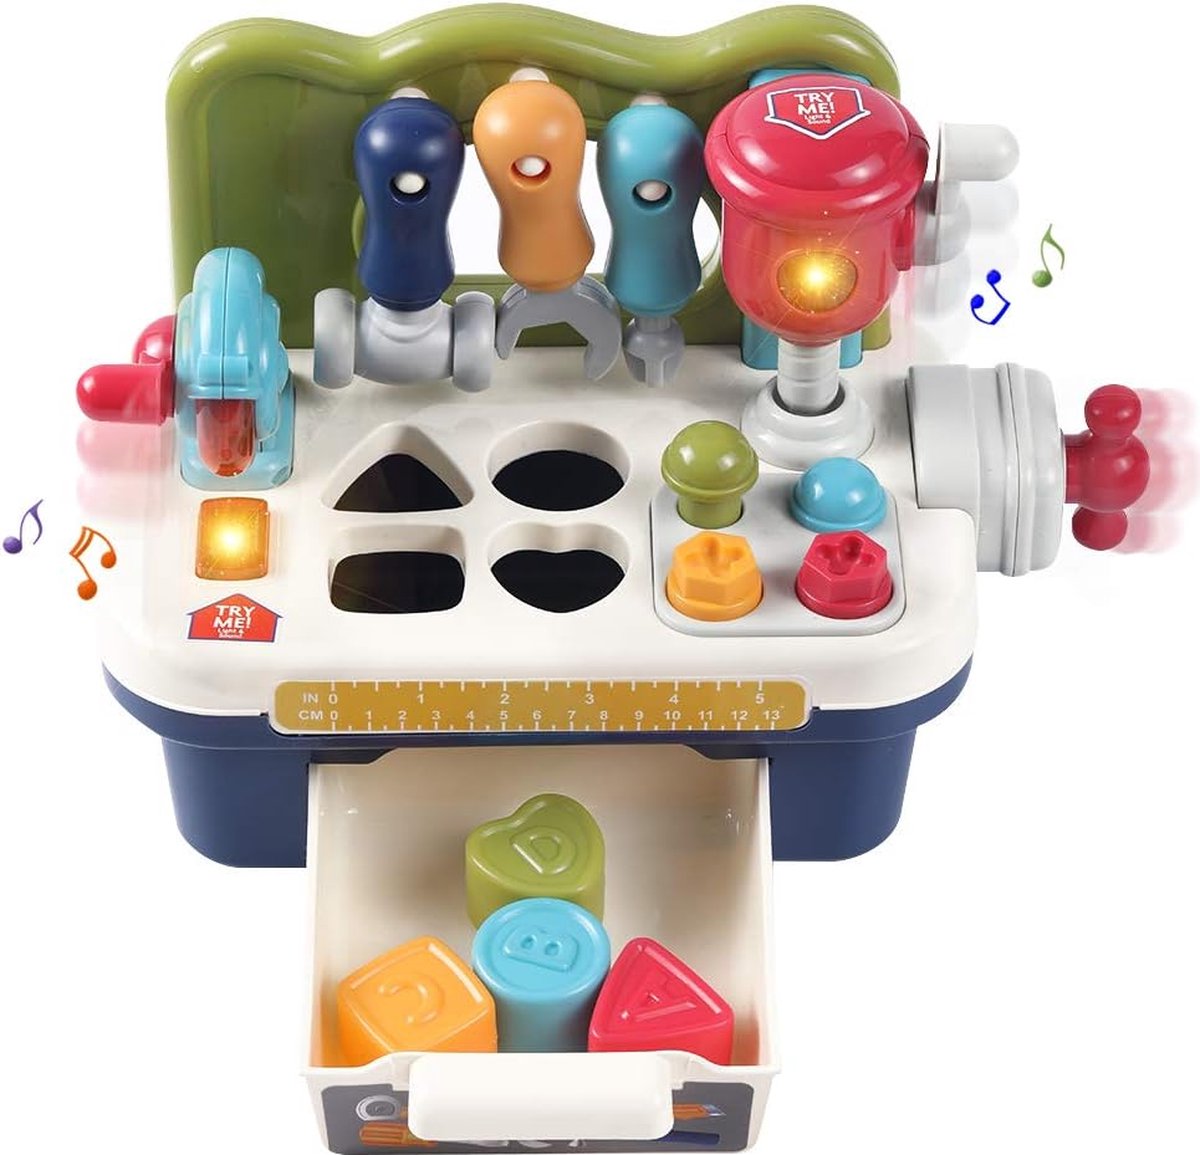 Berkatmarkt - Musical Learning Construction Workbench Toys For Kids Sounds Lights Effects Shape Sorter Early Educational Building Tool Pretend Play For 1 2 3+ Years Old Boys Girls Baby Toddler